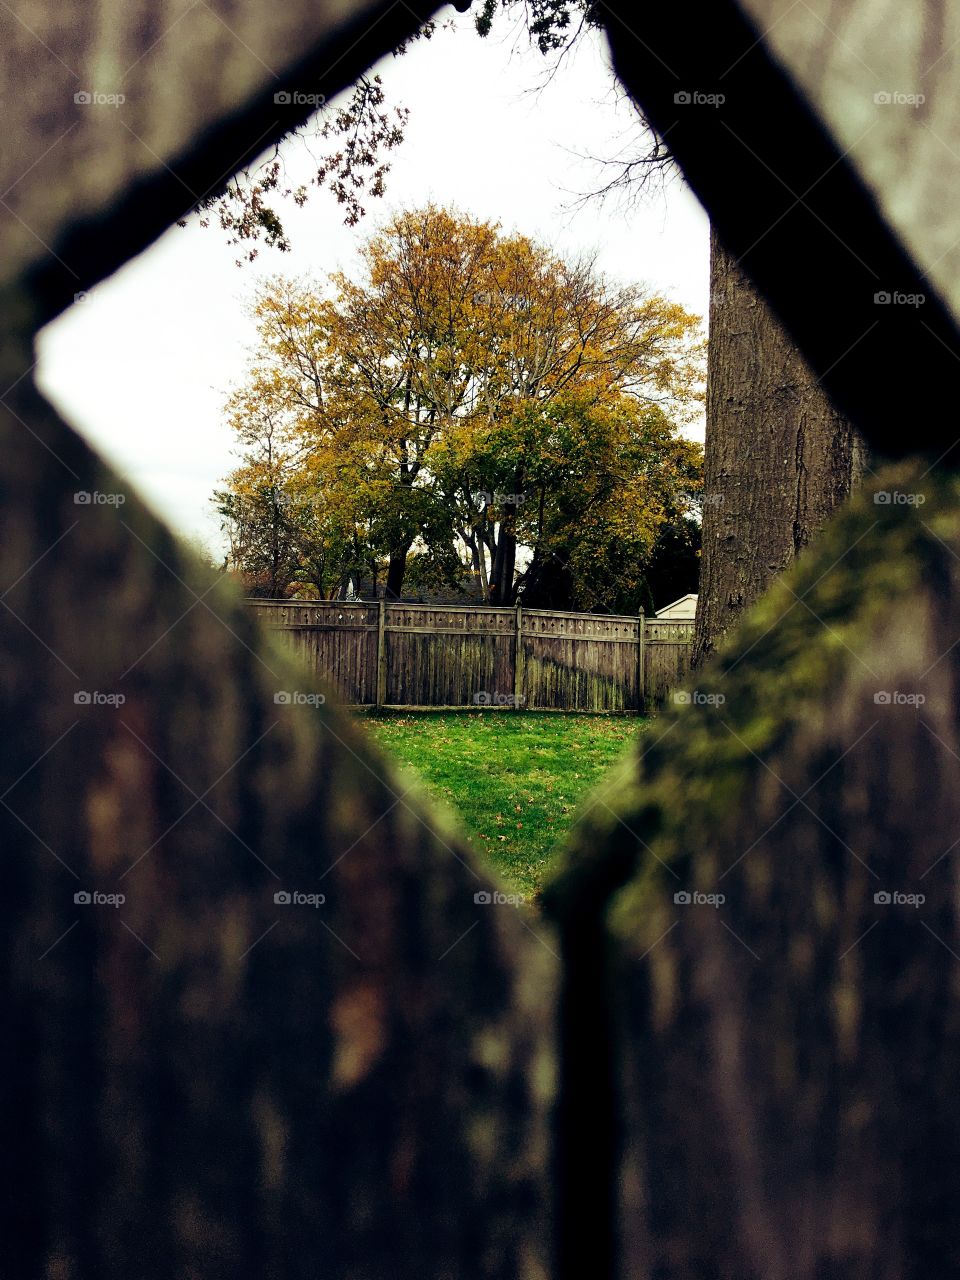 Peaking through the fence in Autumn -- is the grass greener?